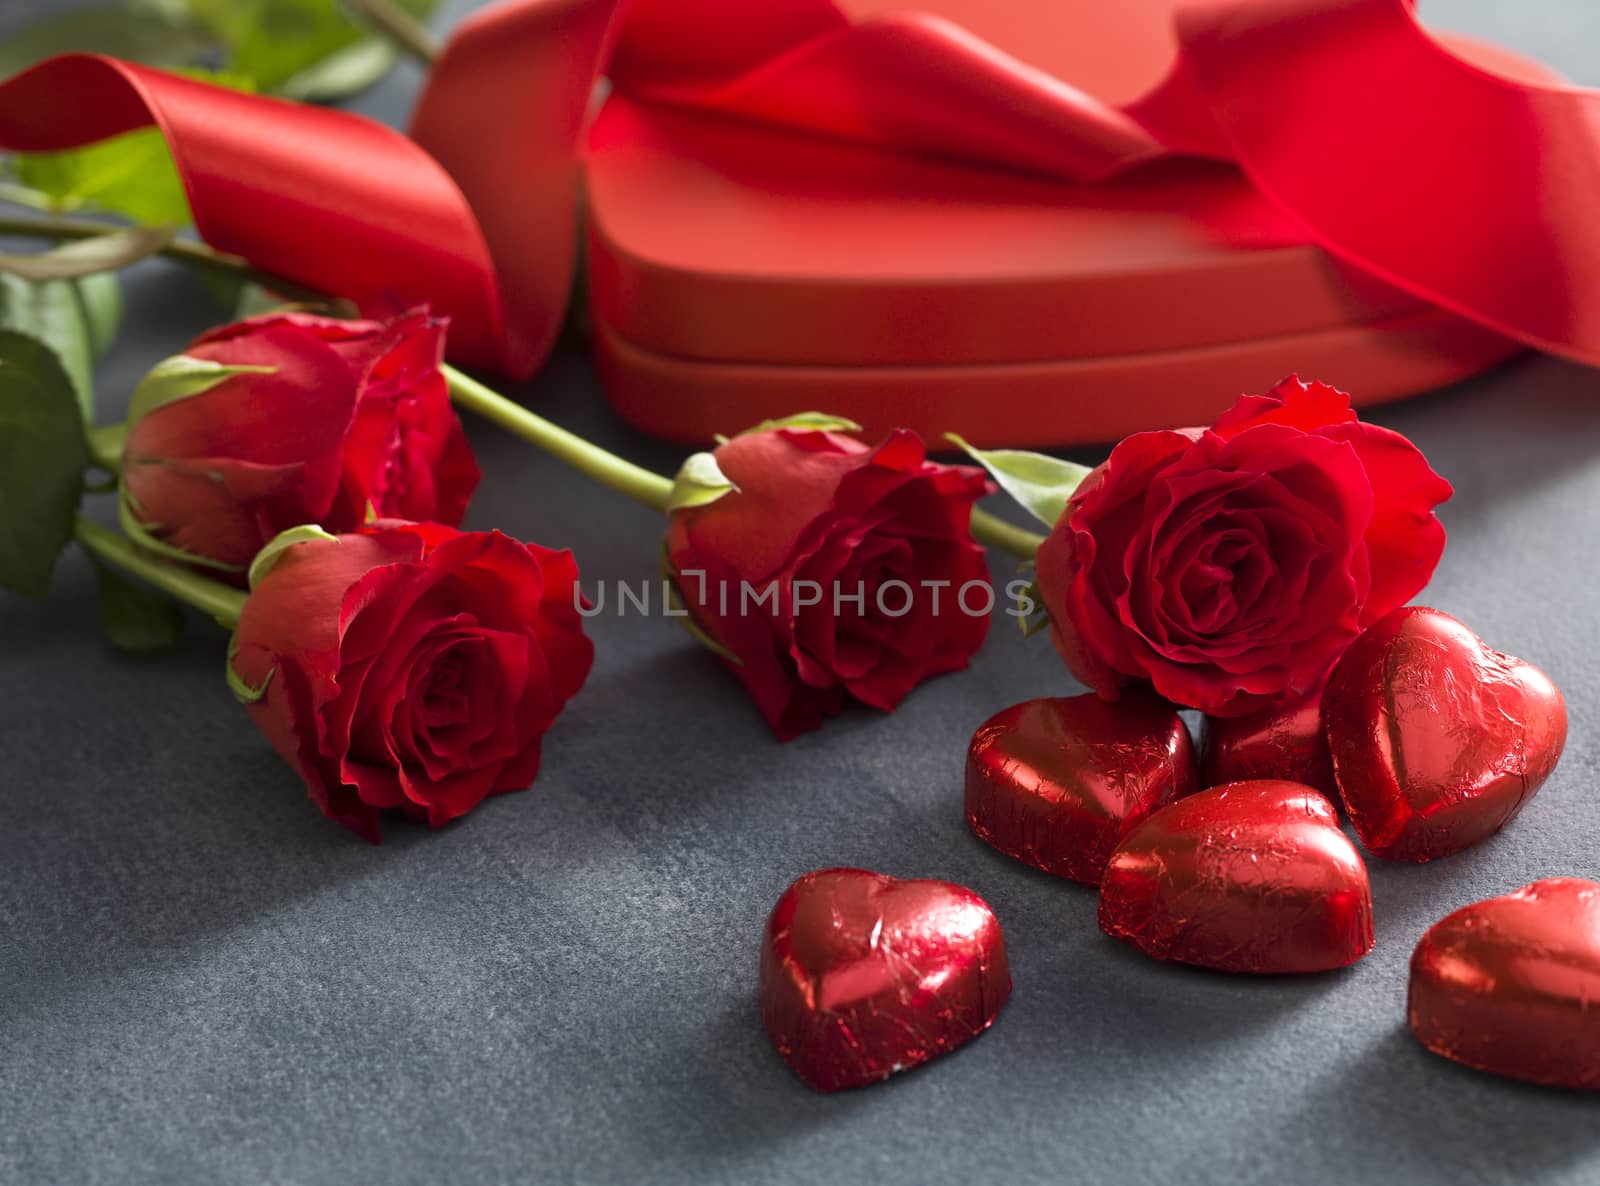 Gift box with red roses and chocolates. Valentines Day concept by janssenkruseproductions